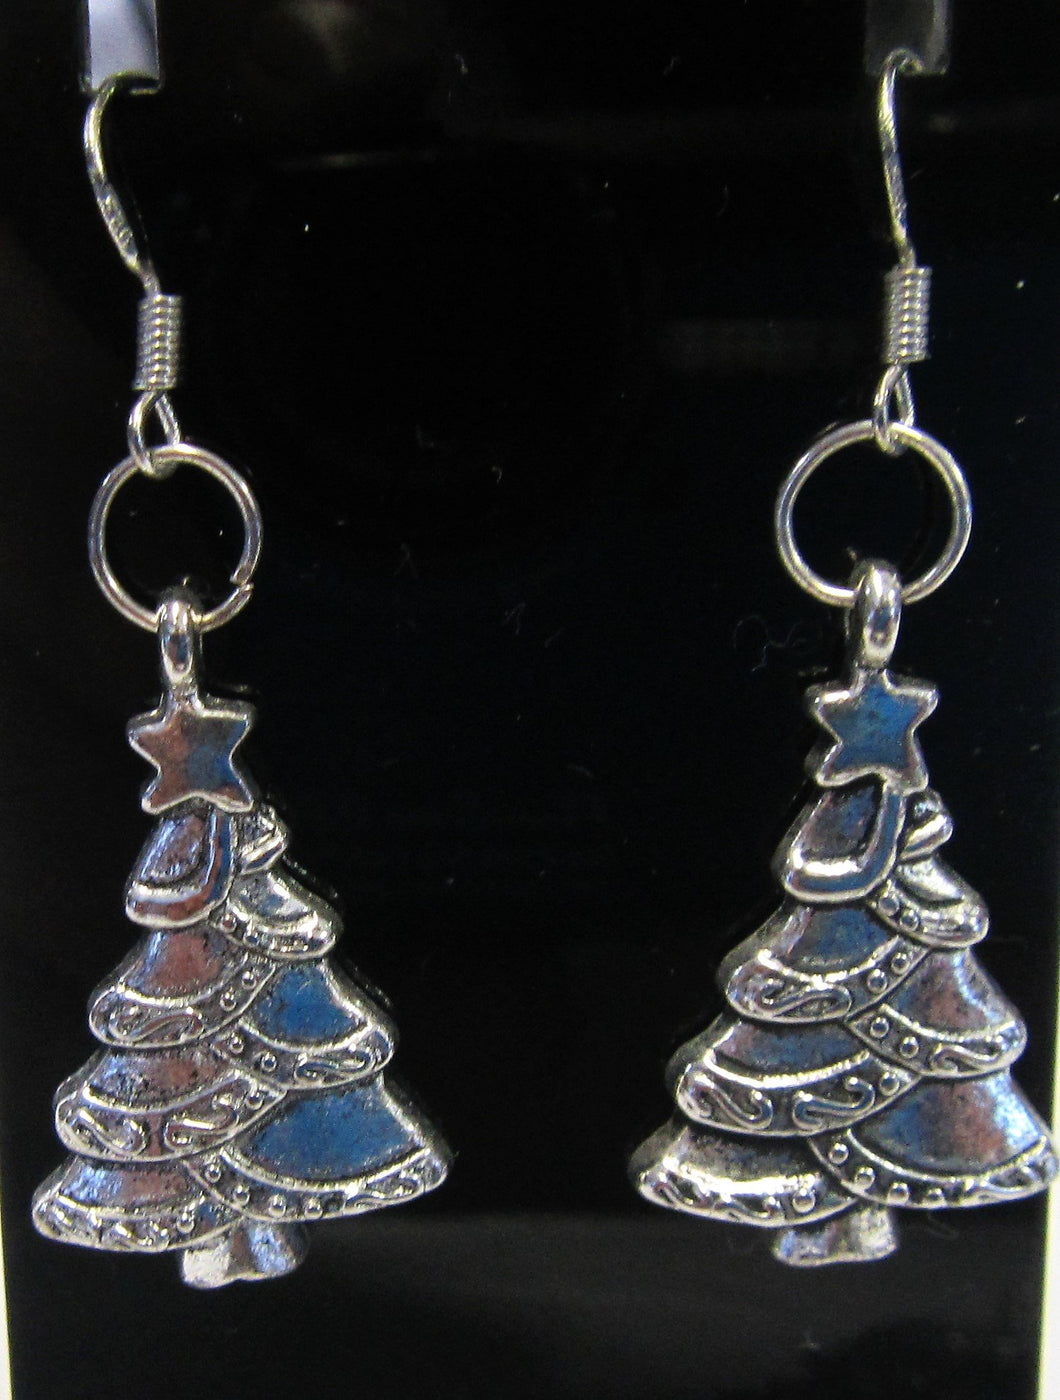 Handcrafted Christmas tree earrings on 925 sterling silver hooks